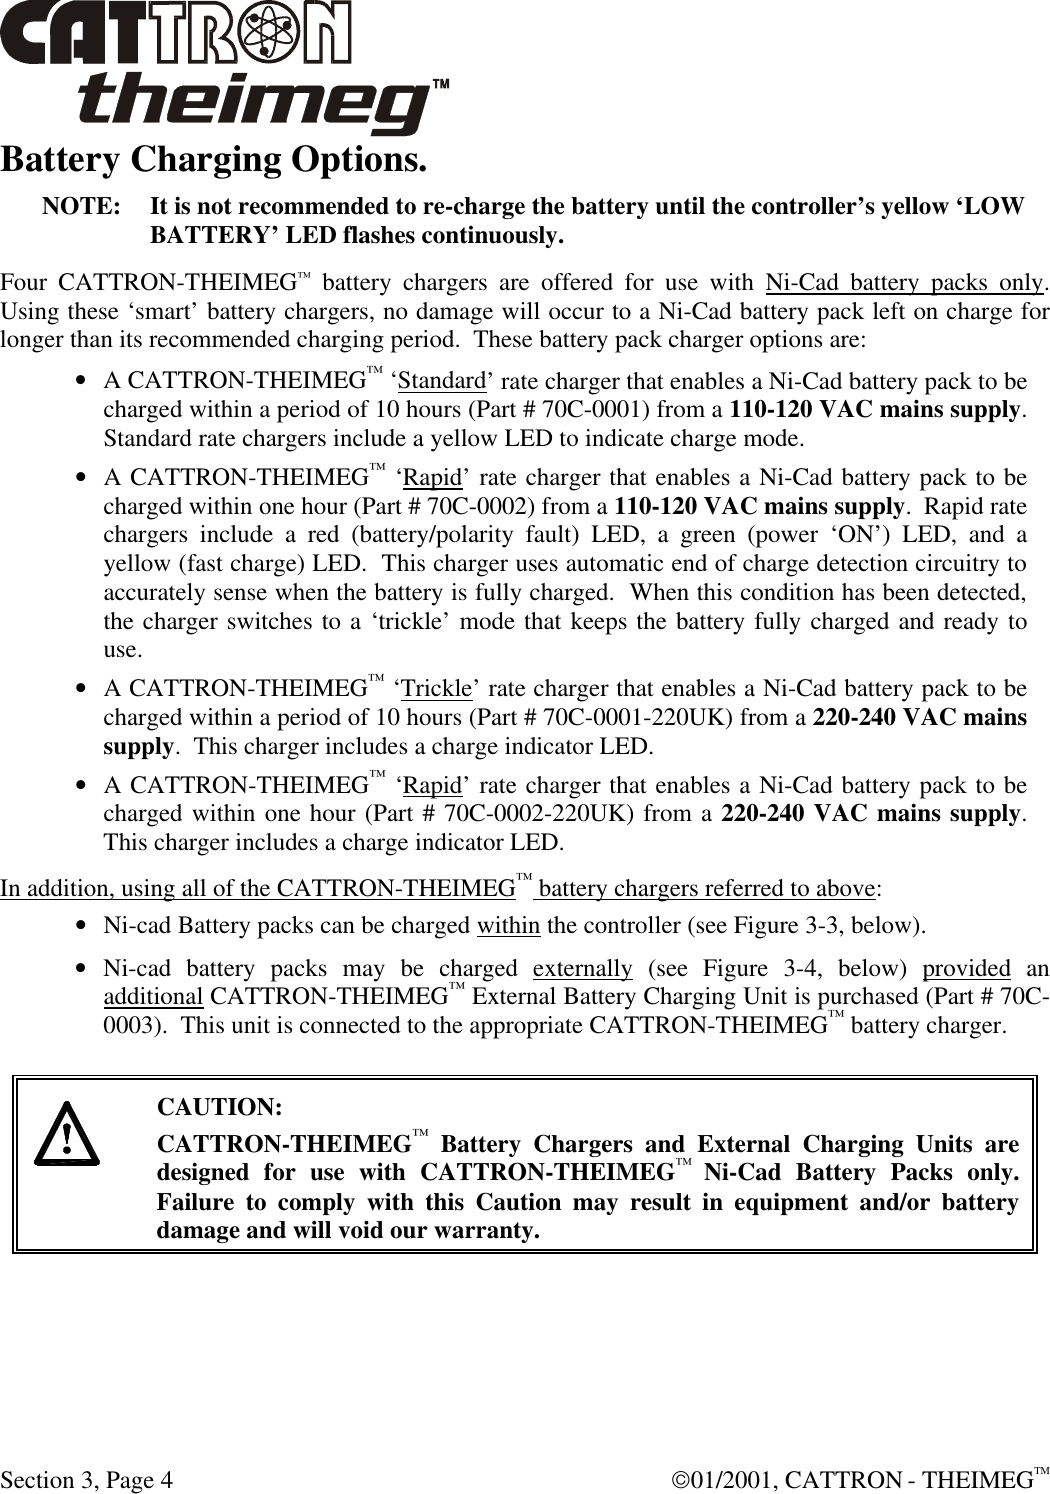  Section 3, Page 4  01/2001, CATTRON - THEIMEGTM Battery Charging Options. NOTE: It is not recommended to re-charge the battery until the controller’s yellow ‘LOW BATTERY’ LED flashes continuously. Four CATTRON-THEIMEG™ battery chargers are offered for use with Ni-Cad battery packs only.  Using these ‘smart’ battery chargers, no damage will occur to a Ni-Cad battery pack left on charge for longer than its recommended charging period.  These battery pack charger options are: • A CATTRON-THEIMEG™ ‘Standard’ rate charger that enables a Ni-Cad battery pack to be charged within a period of 10 hours (Part # 70C-0001) from a 110-120 VAC mains supply.  Standard rate chargers include a yellow LED to indicate charge mode. • A CATTRON-THEIMEG™ ‘Rapid’ rate charger that enables a Ni-Cad battery pack to be charged within one hour (Part # 70C-0002) from a 110-120 VAC mains supply.  Rapid rate chargers include a red (battery/polarity fault) LED, a green (power ‘ON’) LED, and a yellow (fast charge) LED.  This charger uses automatic end of charge detection circuitry to accurately sense when the battery is fully charged.  When this condition has been detected, the charger switches to a ‘trickle’ mode that keeps the battery fully charged and ready to use. • A CATTRON-THEIMEG™ ‘Trickle’ rate charger that enables a Ni-Cad battery pack to be charged within a period of 10 hours (Part # 70C-0001-220UK) from a 220-240 VAC mains supply.  This charger includes a charge indicator LED. • A CATTRON-THEIMEG™ ‘Rapid’ rate charger that enables a Ni-Cad battery pack to be charged within one hour (Part # 70C-0002-220UK) from a 220-240 VAC mains supply. This charger includes a charge indicator LED.  In addition, using all of the CATTRON-THEIMEG™ battery chargers referred to above: • Ni-cad Battery packs can be charged within the controller (see Figure 3-3, below). • Ni-cad battery packs may be charged externally (see Figure 3-4, below) provided an additional CATTRON-THEIMEG™ External Battery Charging Unit is purchased (Part # 70C-0003).  This unit is connected to the appropriate CATTRON-THEIMEG™ battery charger.     CAUTION: CATTRON-THEIMEG™ Battery Chargers and External Charging Units are designed for use with CATTRON-THEIMEG™ Ni-Cad Battery Packs only.  Failure to comply with this Caution may result in equipment and/or battery damage and will void our warranty.  